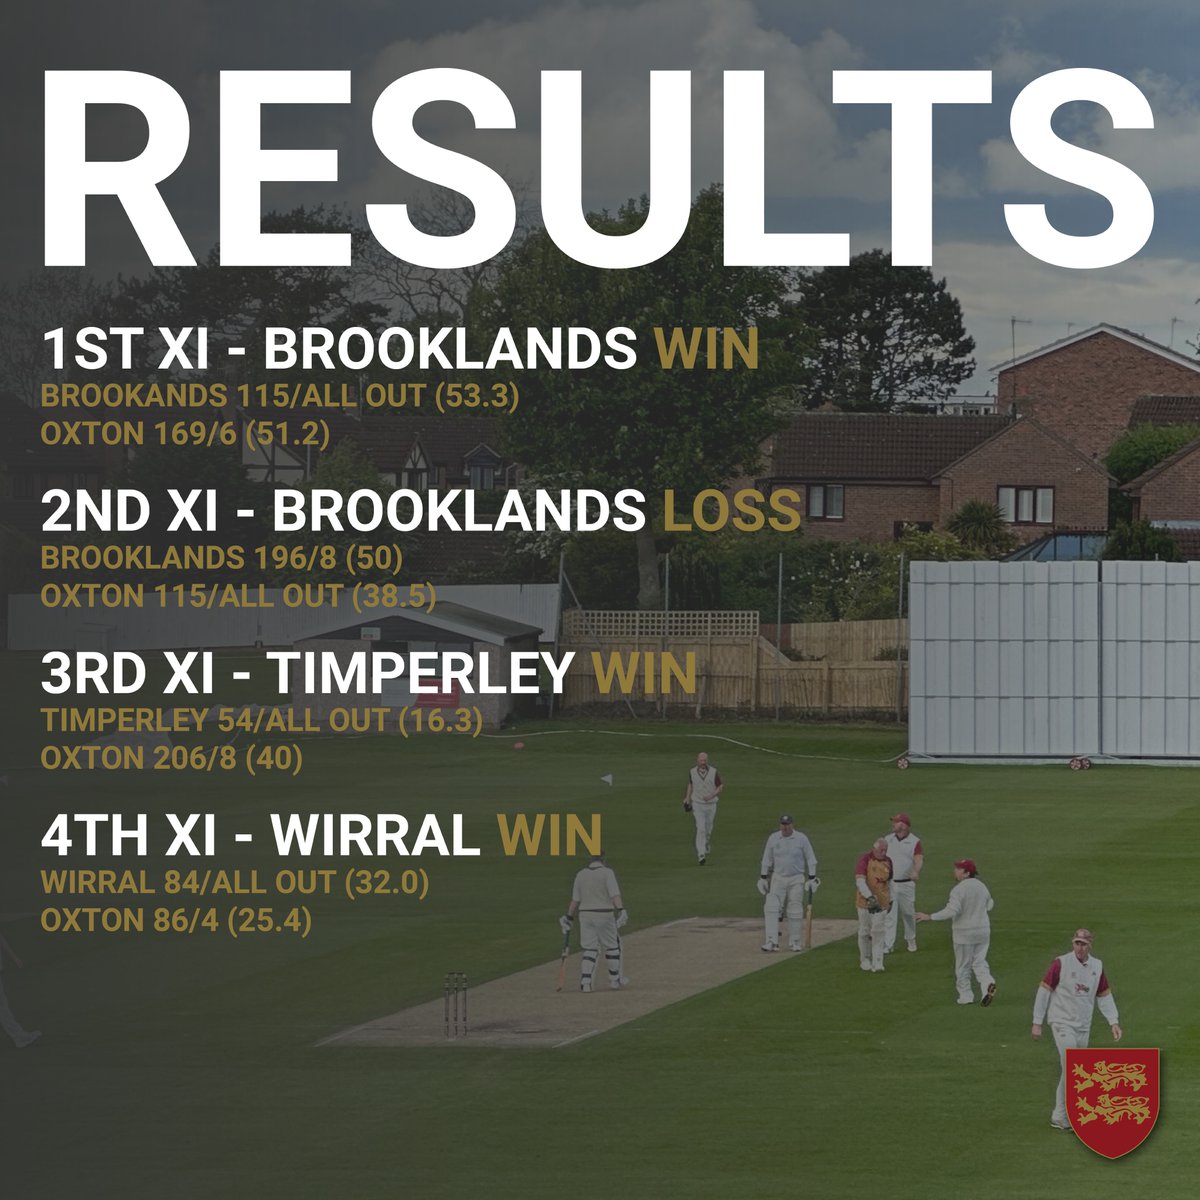 Another great weekend for our teams! 🏏 Thank you to everyone who came to watch the matches and supported our teams this weekend! 🙌 - #oxton #oxtoncc #wirral #cricket #wirralcricket #wirralcricketclub #oxtoncricketclub #oxtoncricketclub #results #fixtures